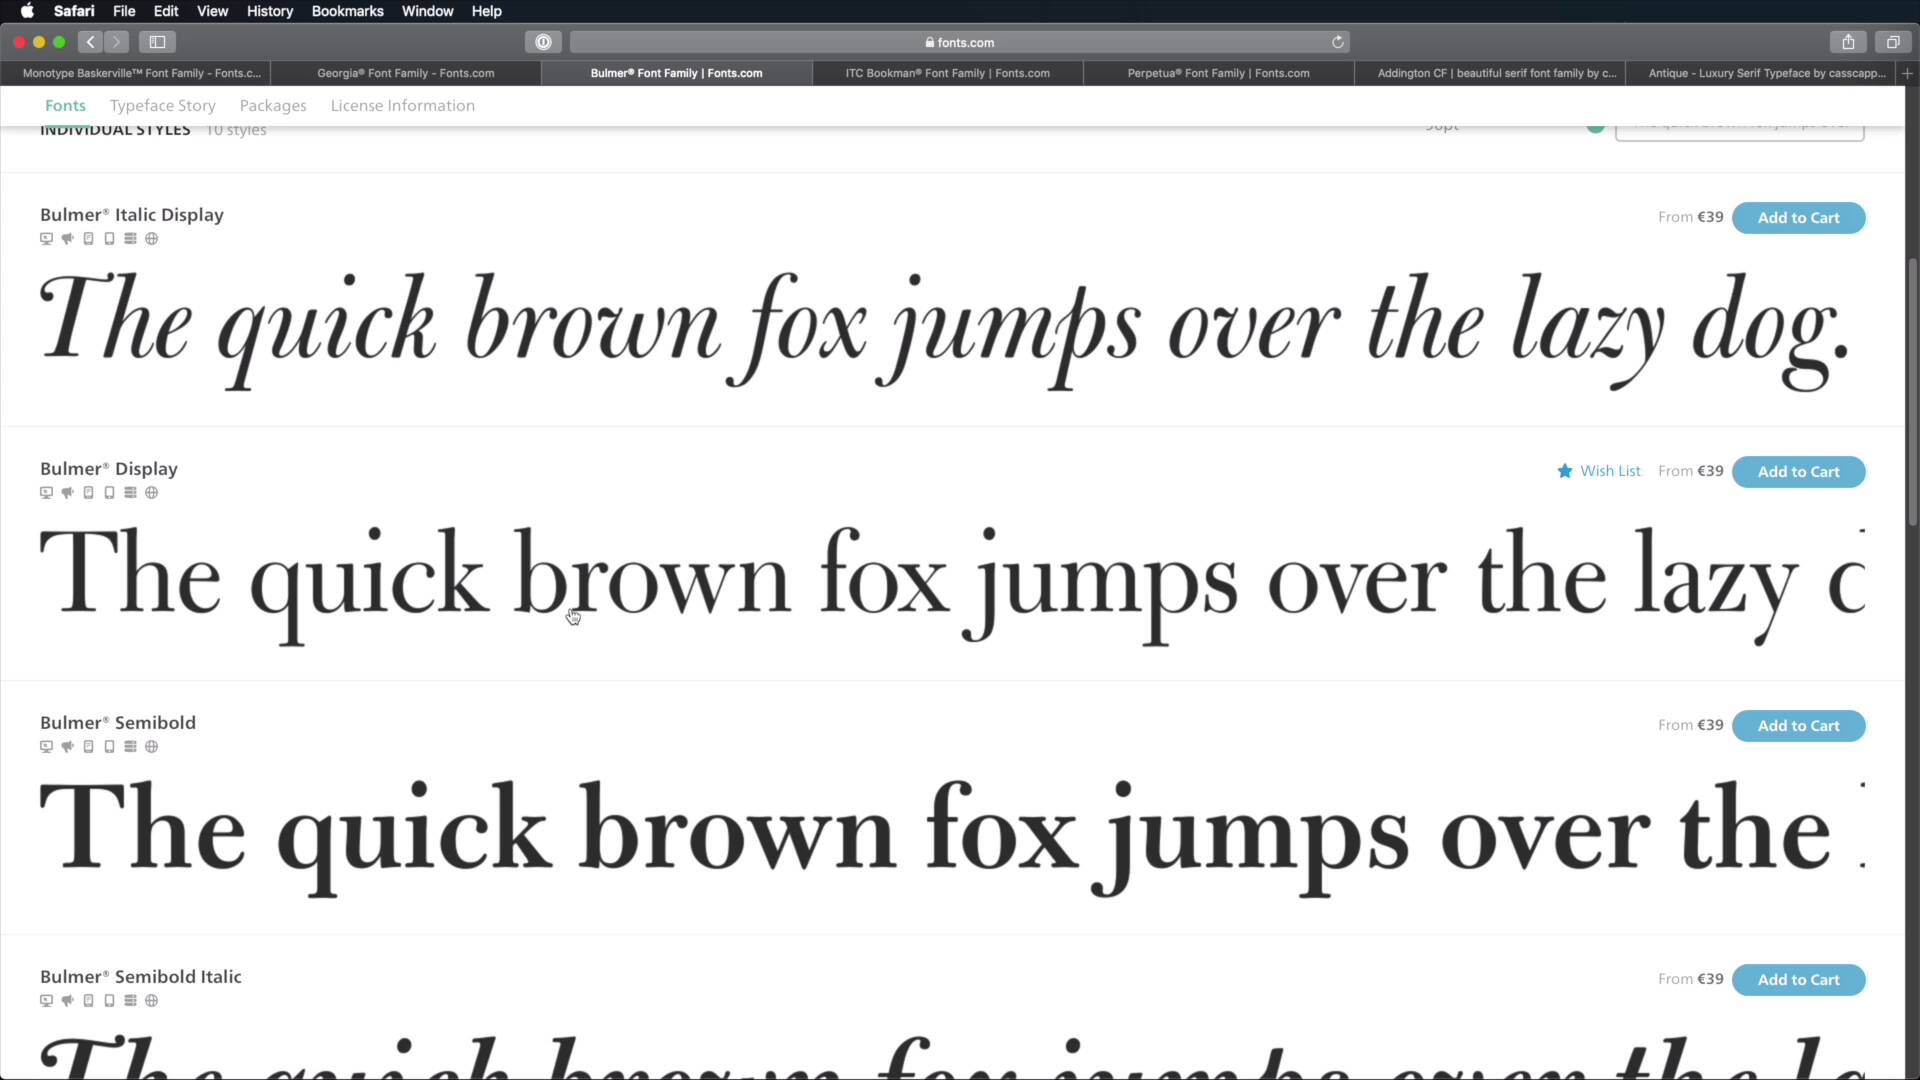 transitional typeface examples